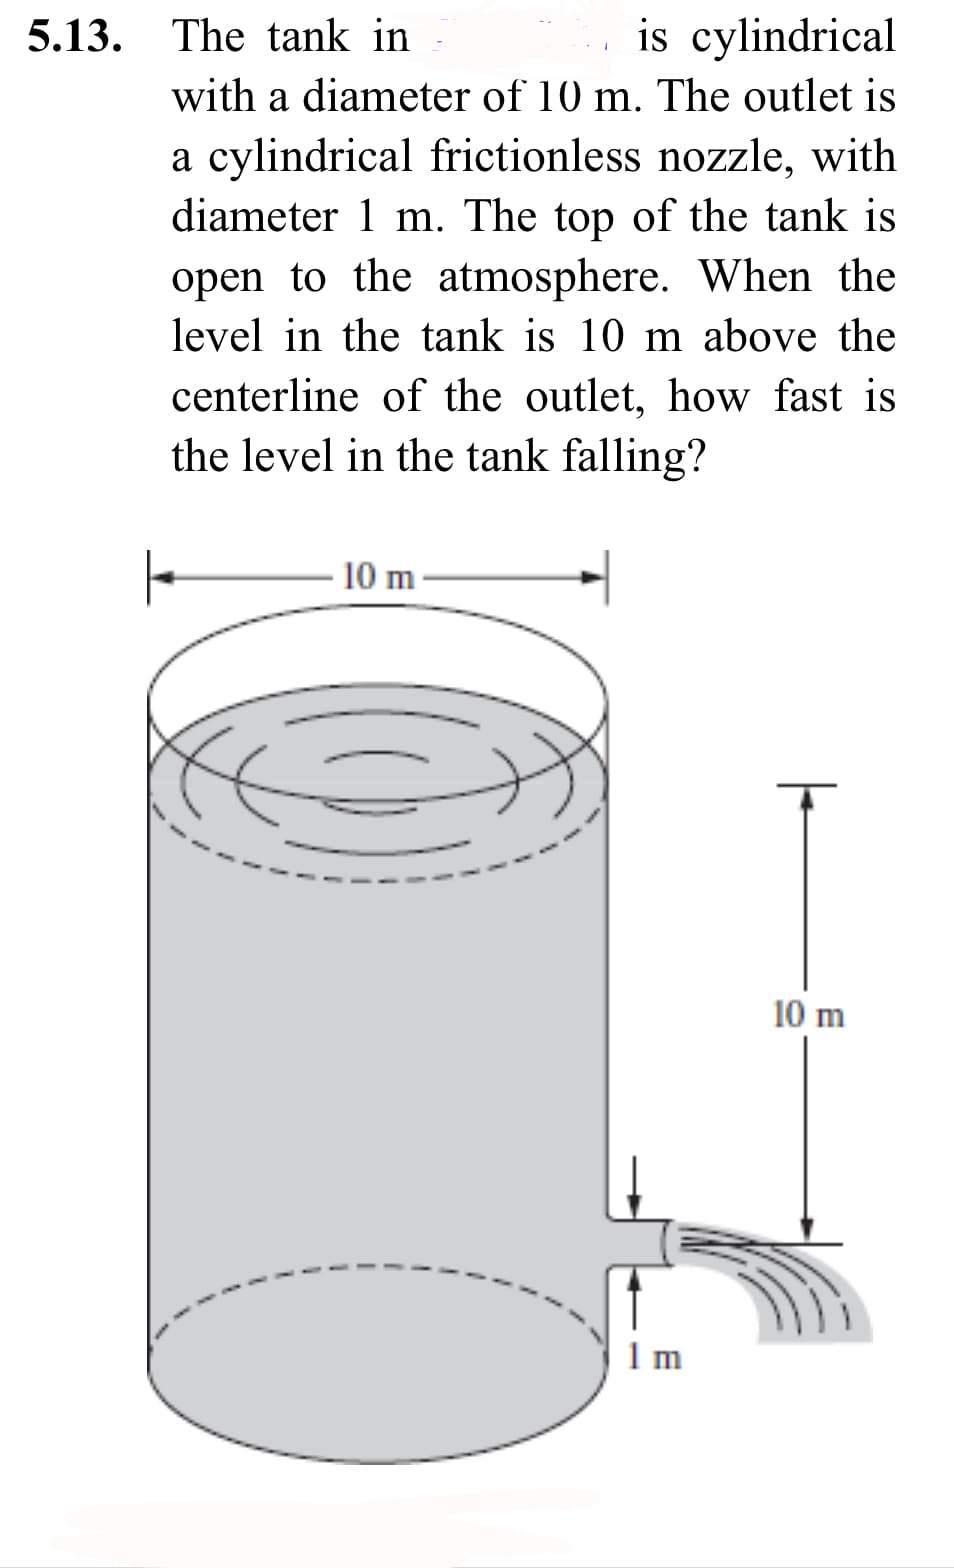 5.13. The tank in
is cylindrical
with a diameter of 10 m. The outlet is
a cylindrical frictionless nozzle, with
diameter 1 m. The top of the tank is
open to the atmosphere. When the
level in the tank is 10 m above the
centerline of the outlet, how fast is
the level in the tank falling?
F
t
10 m
1m
|
10 m